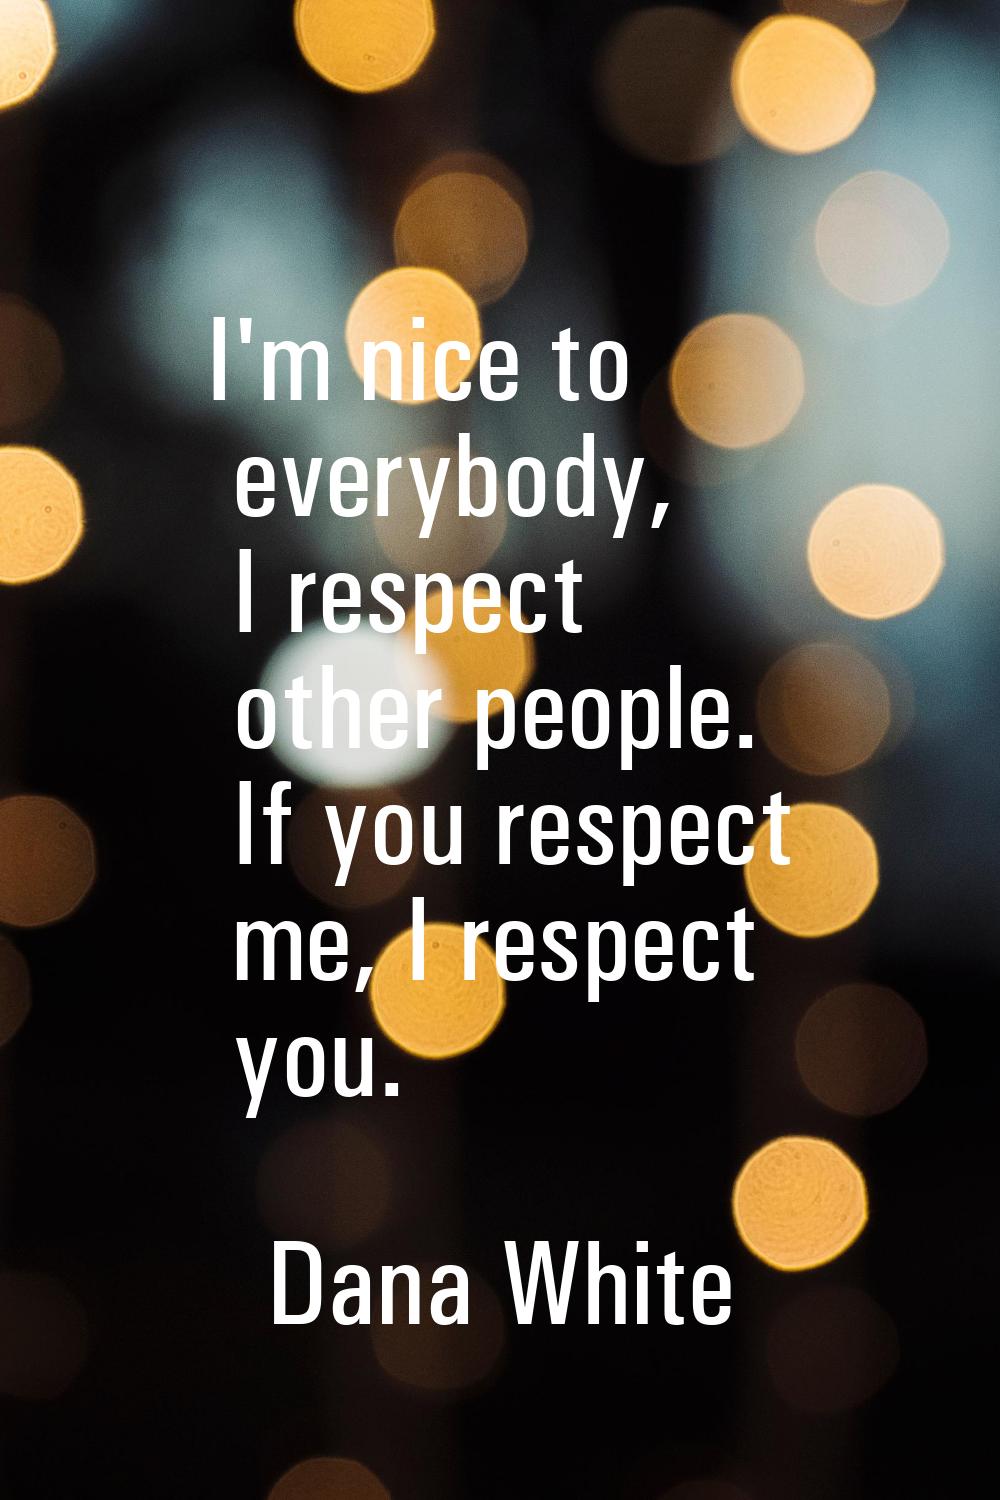 I'm nice to everybody, I respect other people. If you respect me, I respect you.